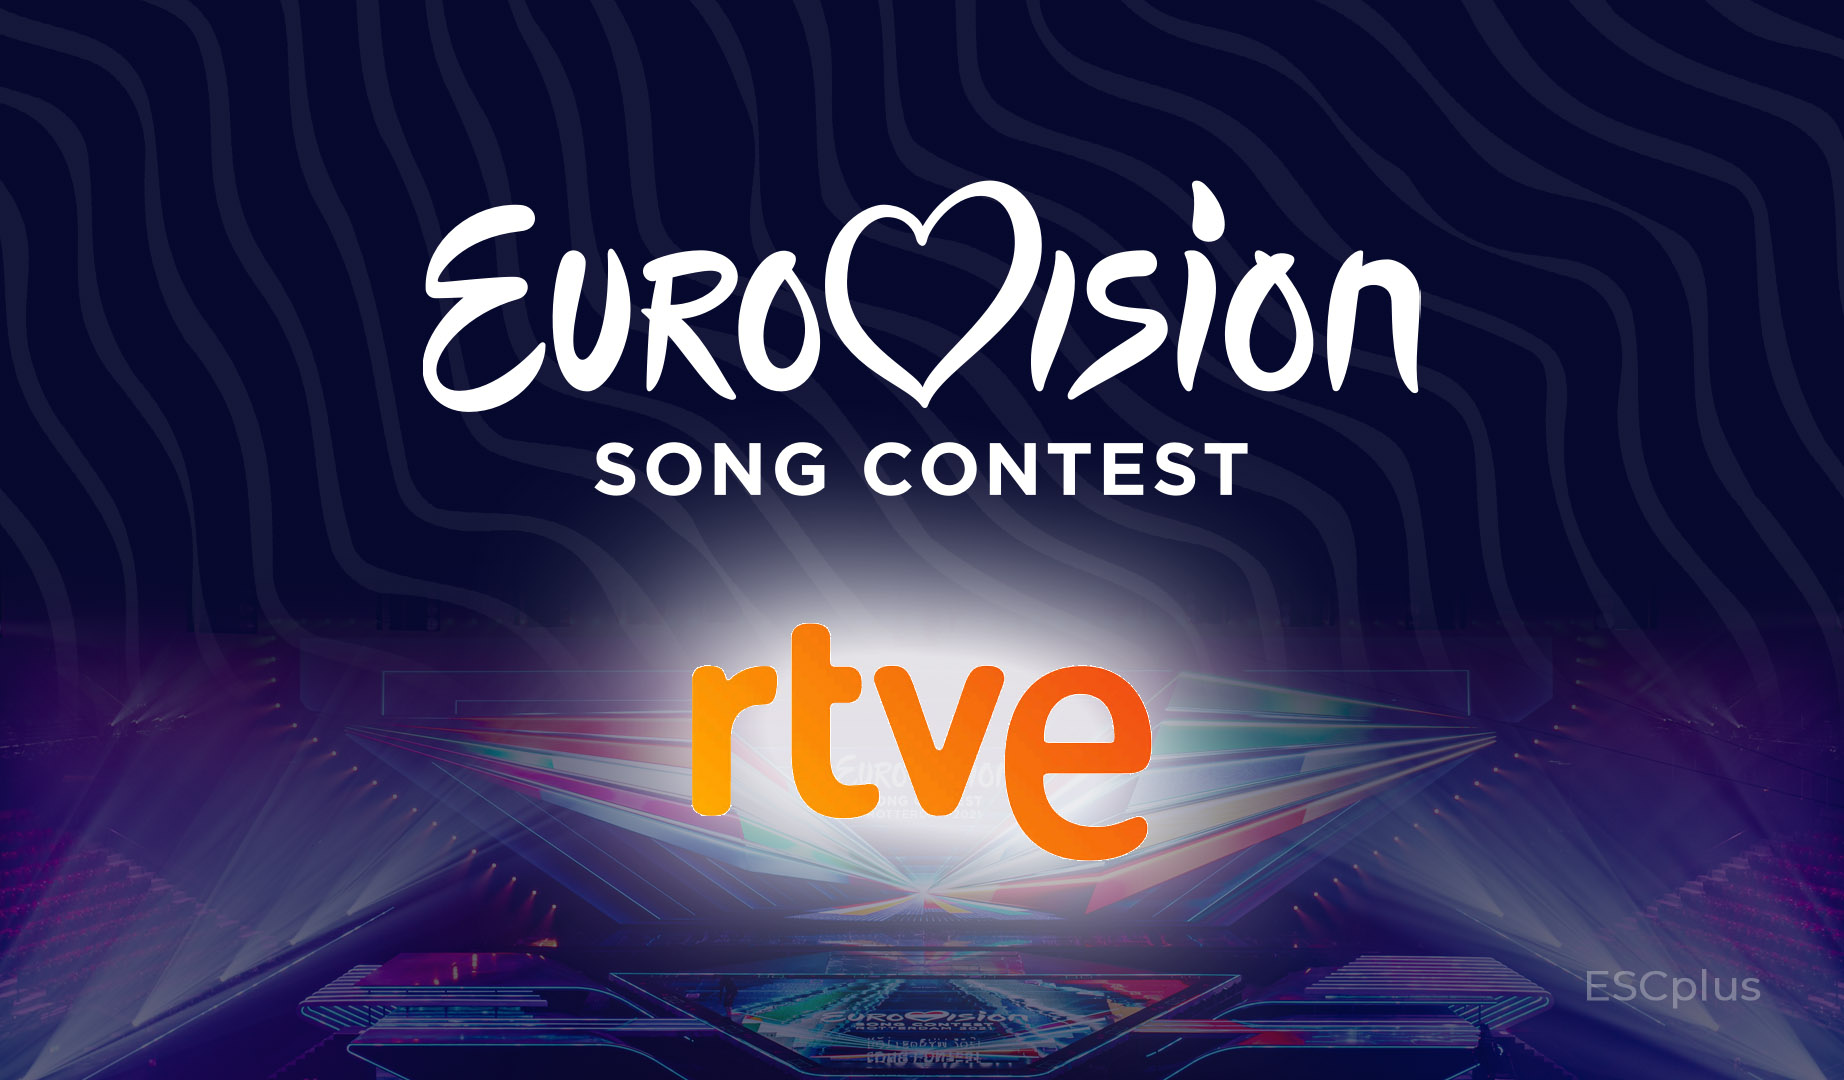 Spain: RTVE makes big changes affecting Eurovision